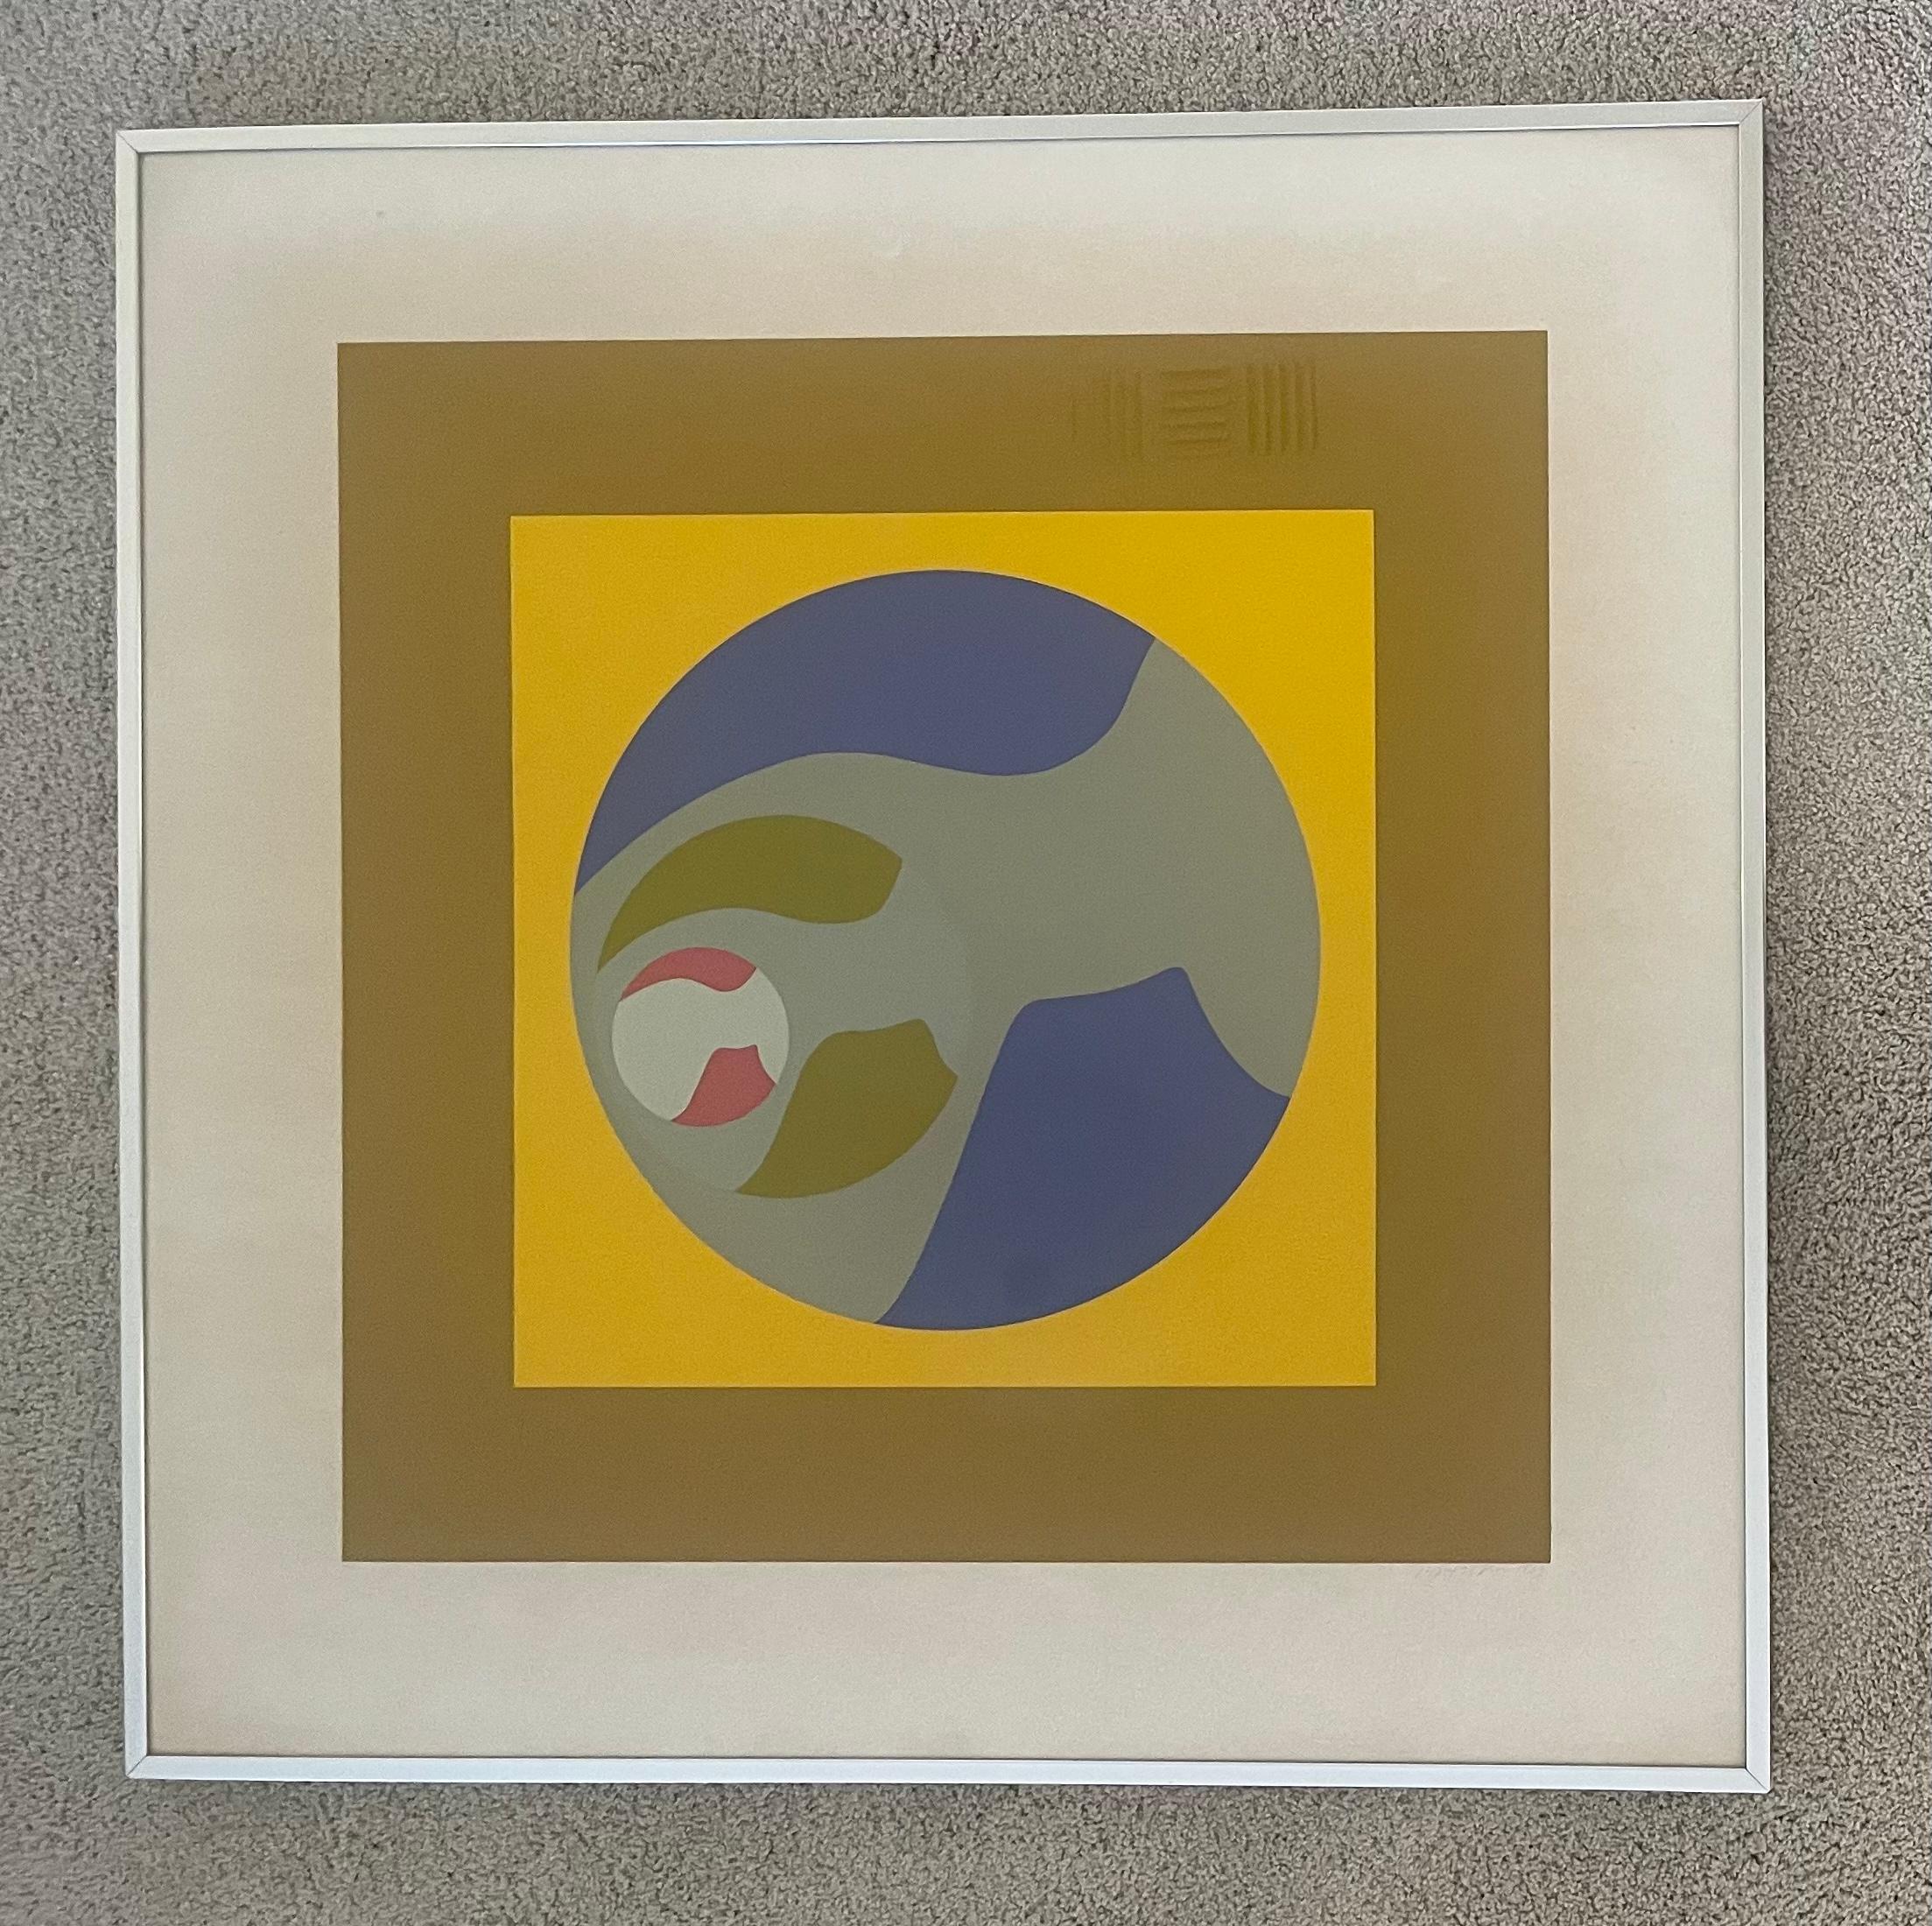 A very nice signed limited edition serigraph entitled 